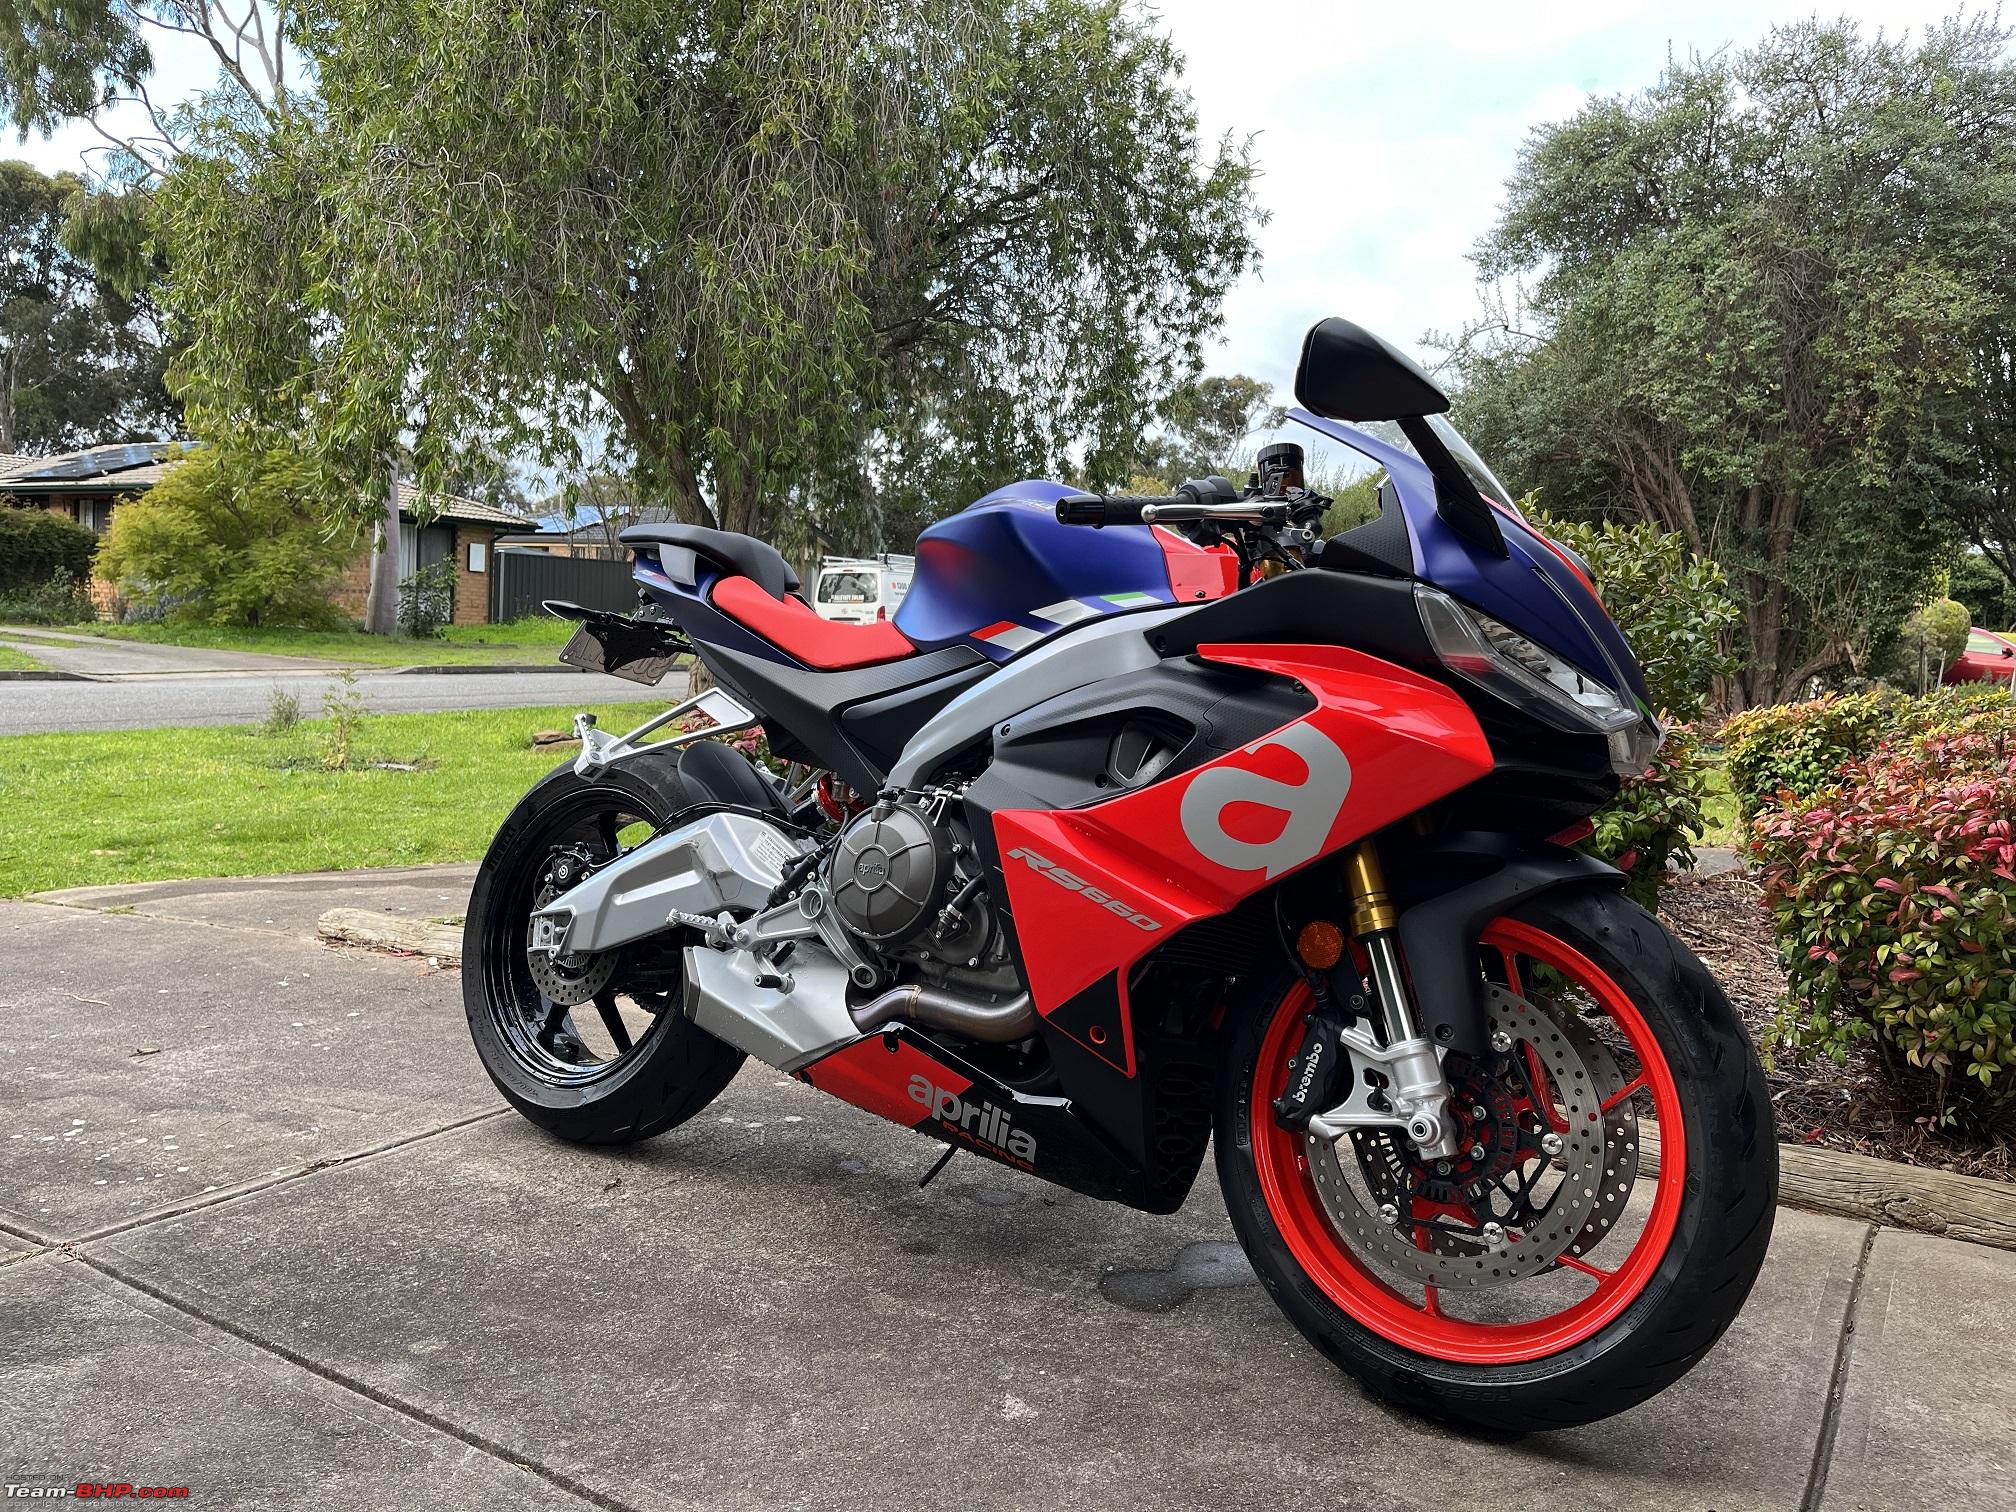 Aprilia RS 660 Priced at €11,050 for Europe, But What About the